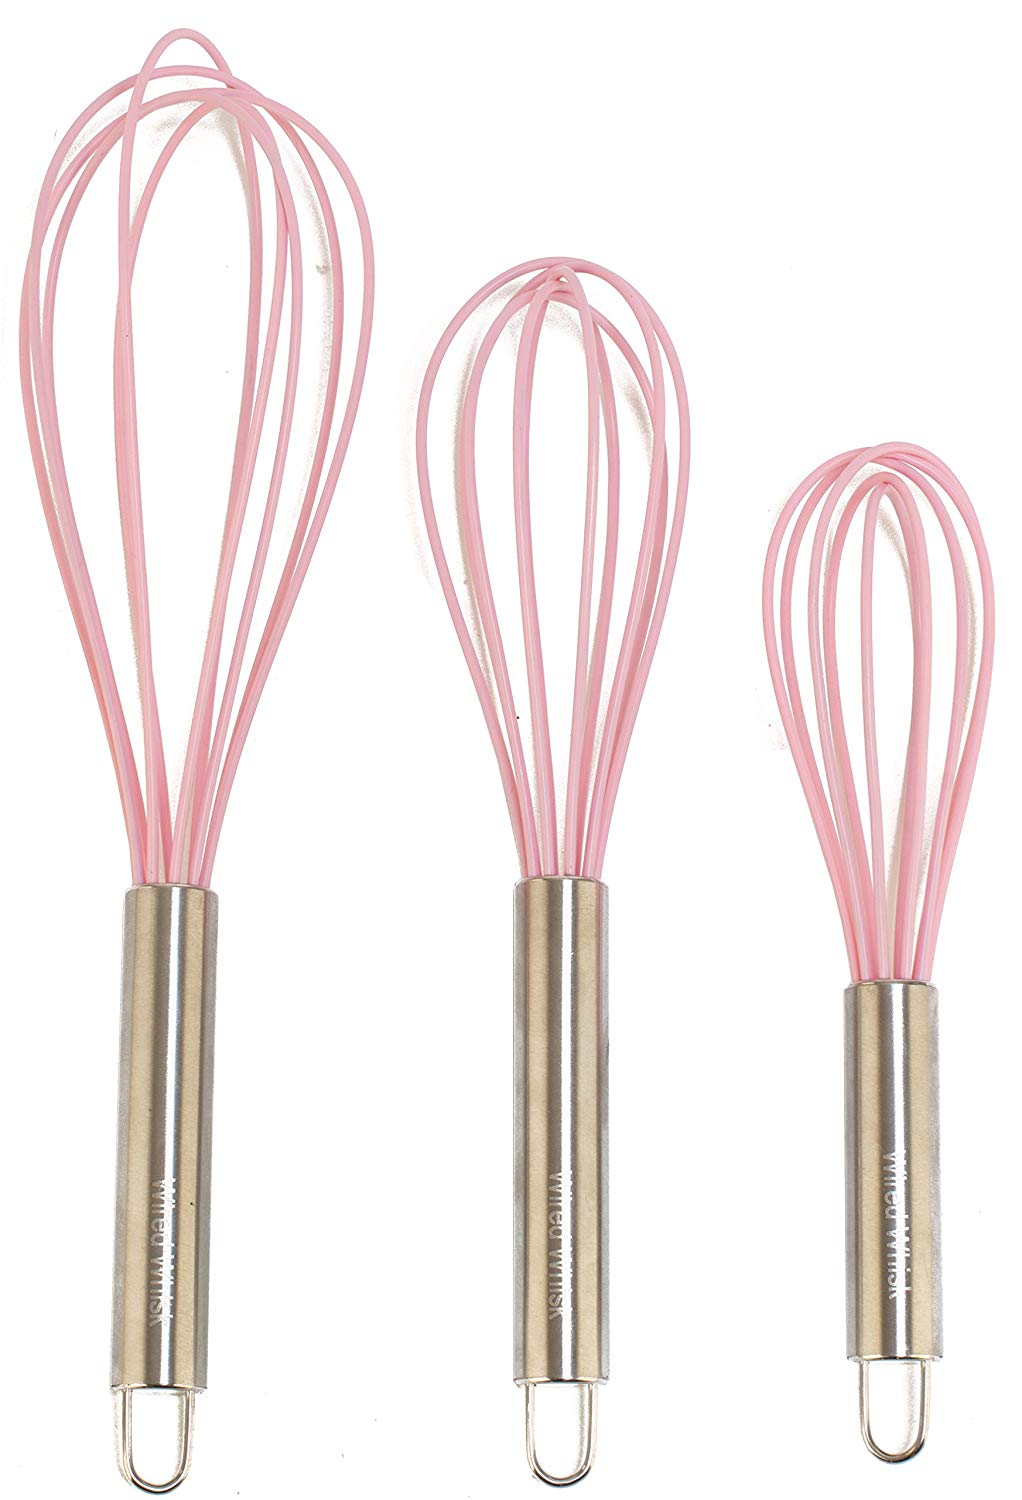 https://www.dontwasteyourmoney.com/wp-content/uploads/2019/09/wired-whisk-silicone-whisk-whisk.jpg